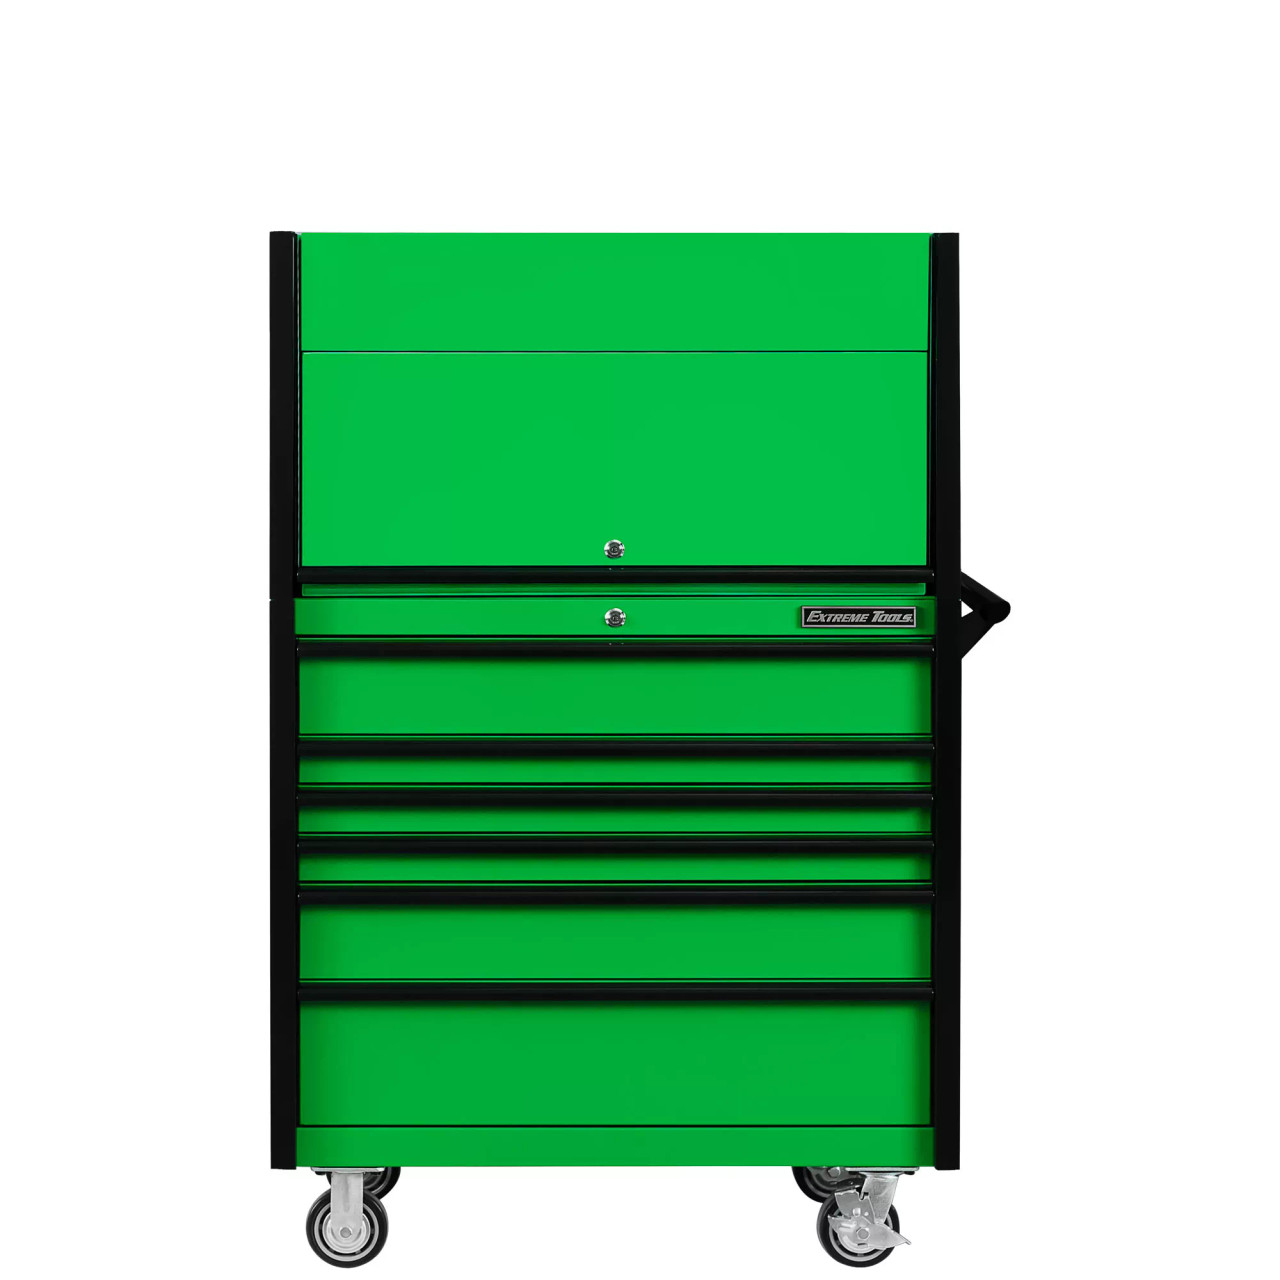 Extreme Tools DX4107HRGK 41" Power Workstation and Roller Cabinet Combo - Green with Black Pulls